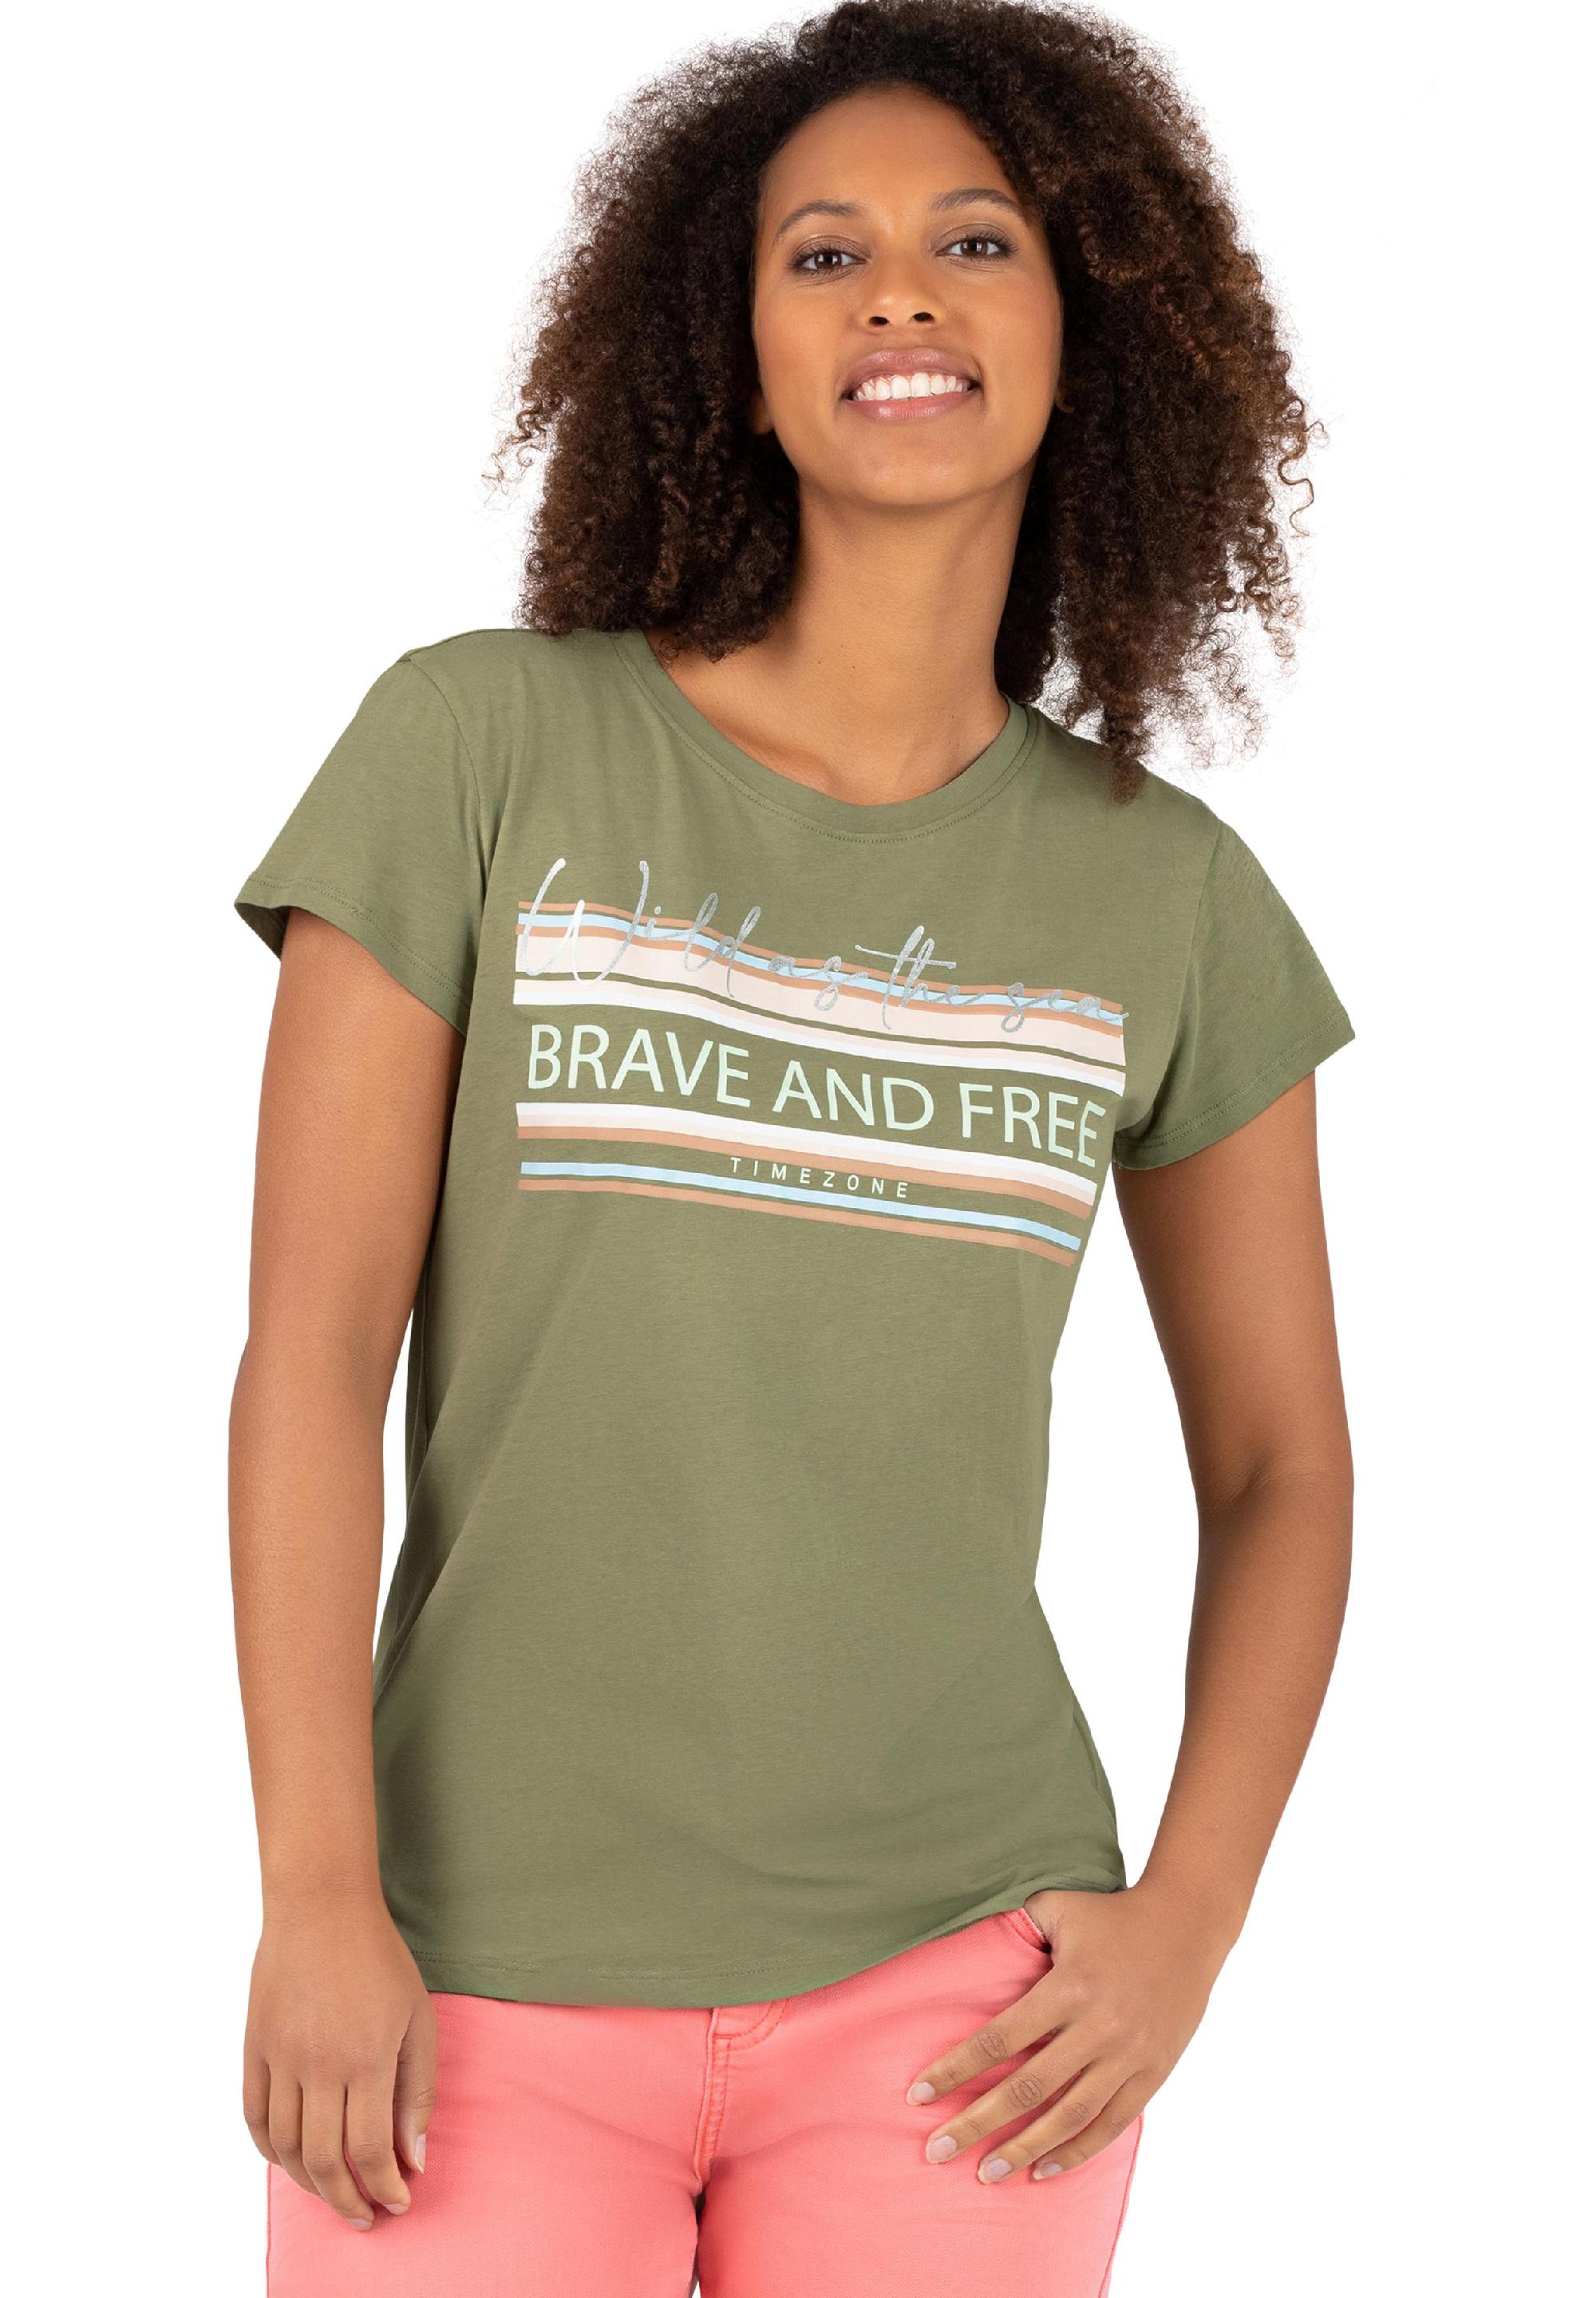 Brave and Free T-Shirt decoration